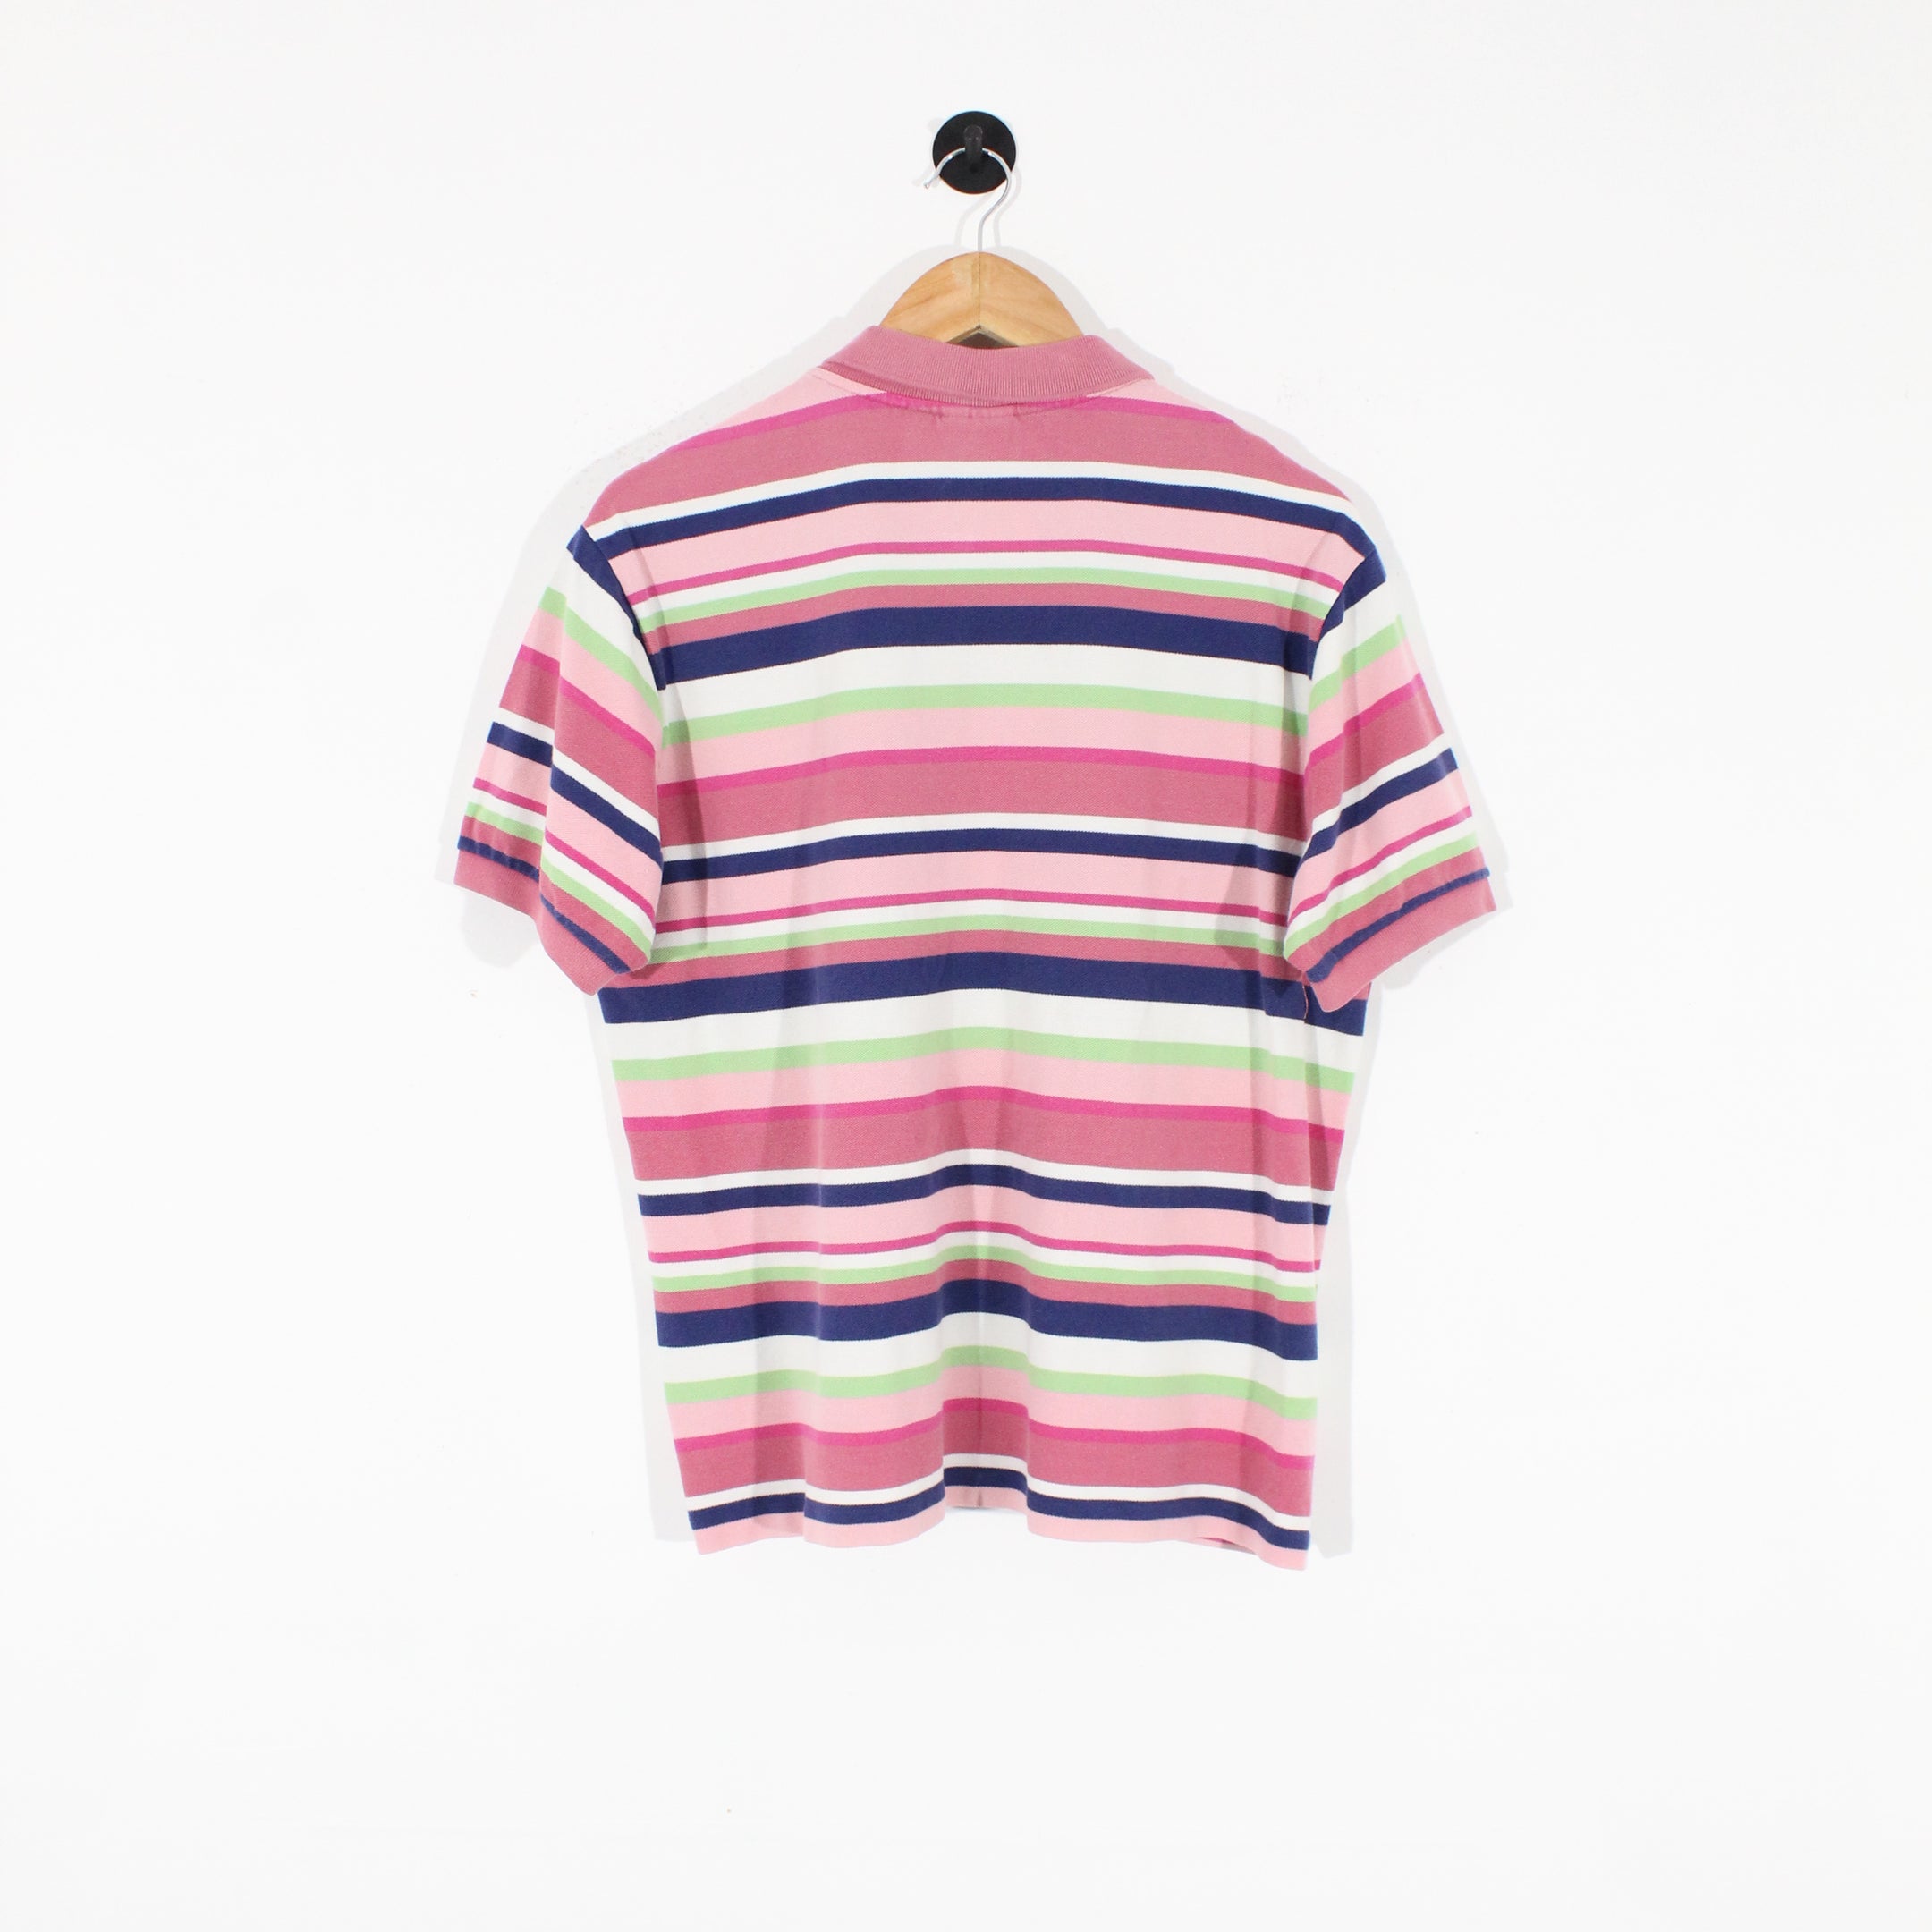 Lacoste Striped Polo Shirt (S)